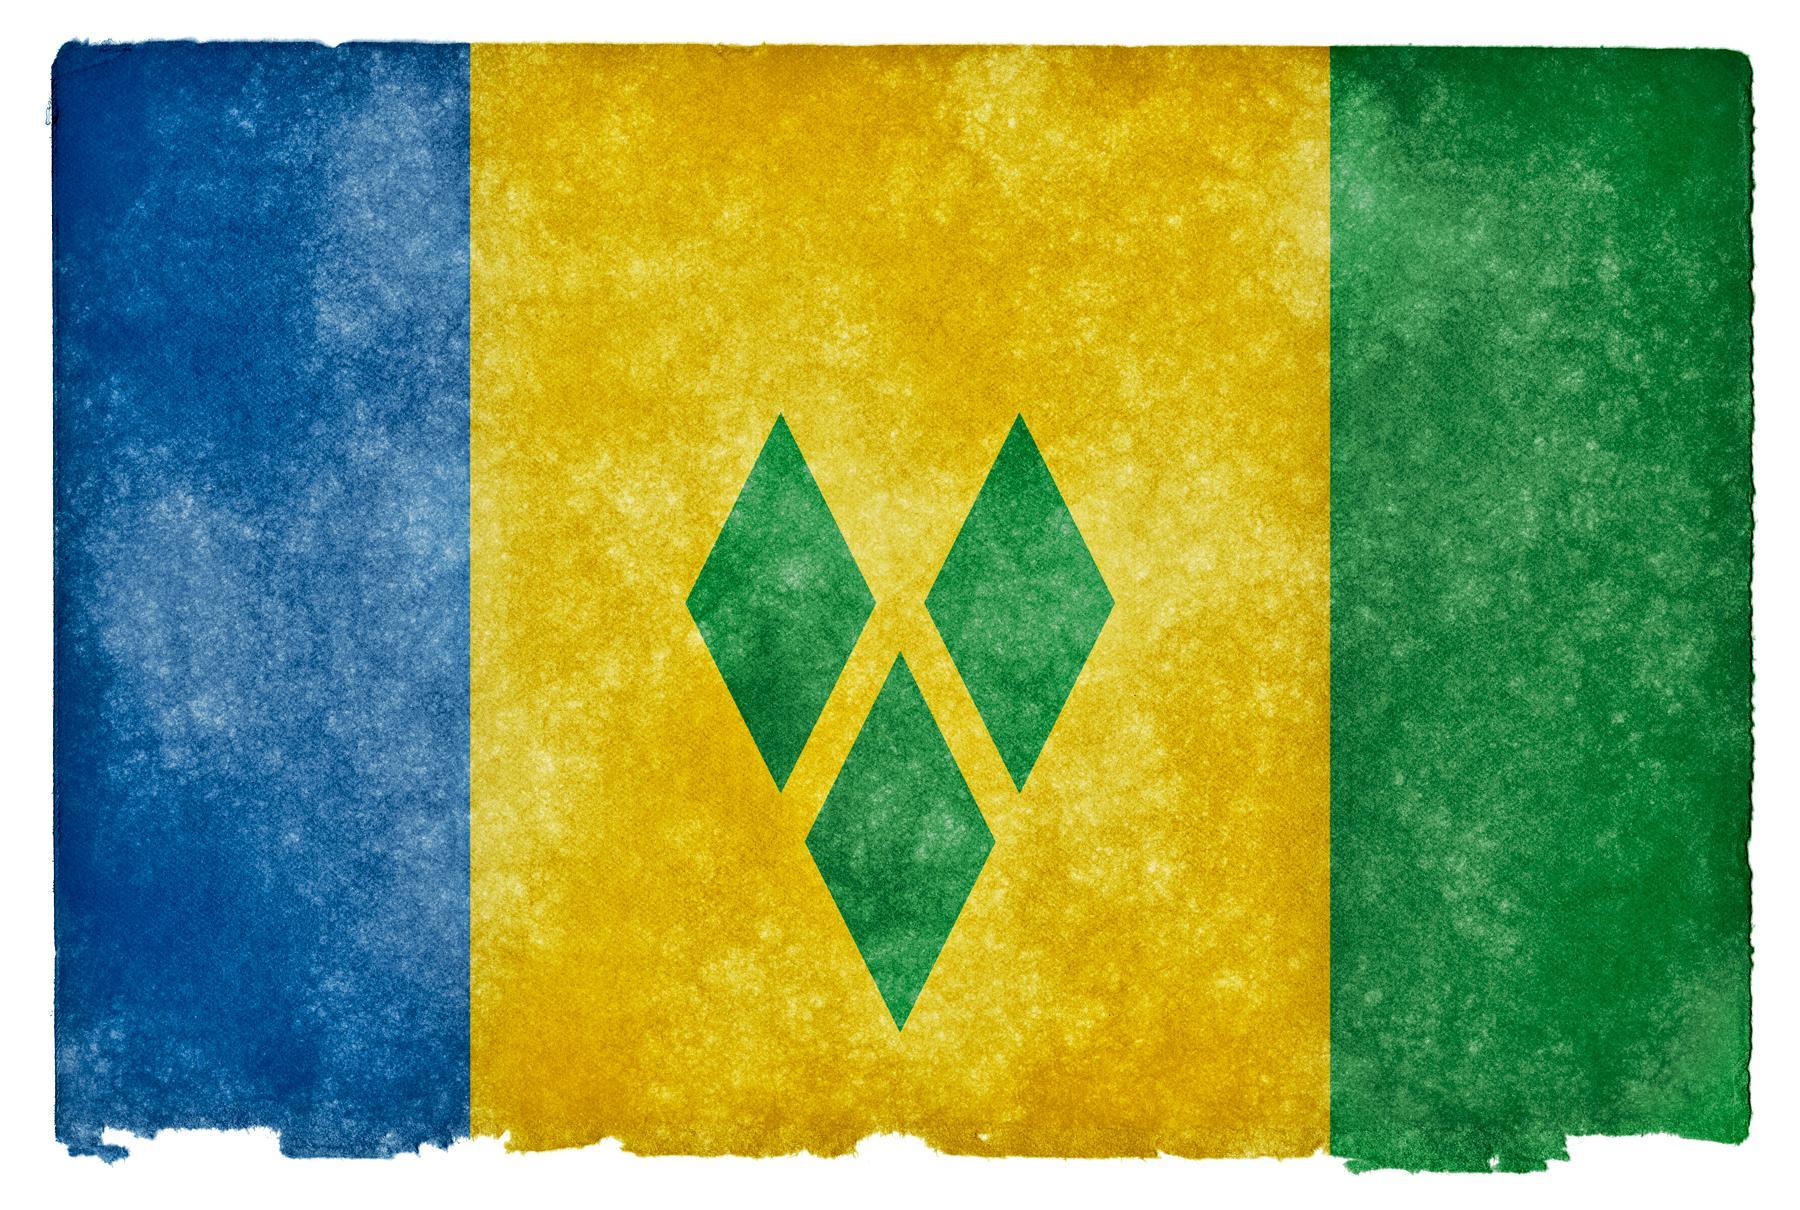 Saint Vincent and the Grenadines Grunge Flag HD Wallpaper. Wide